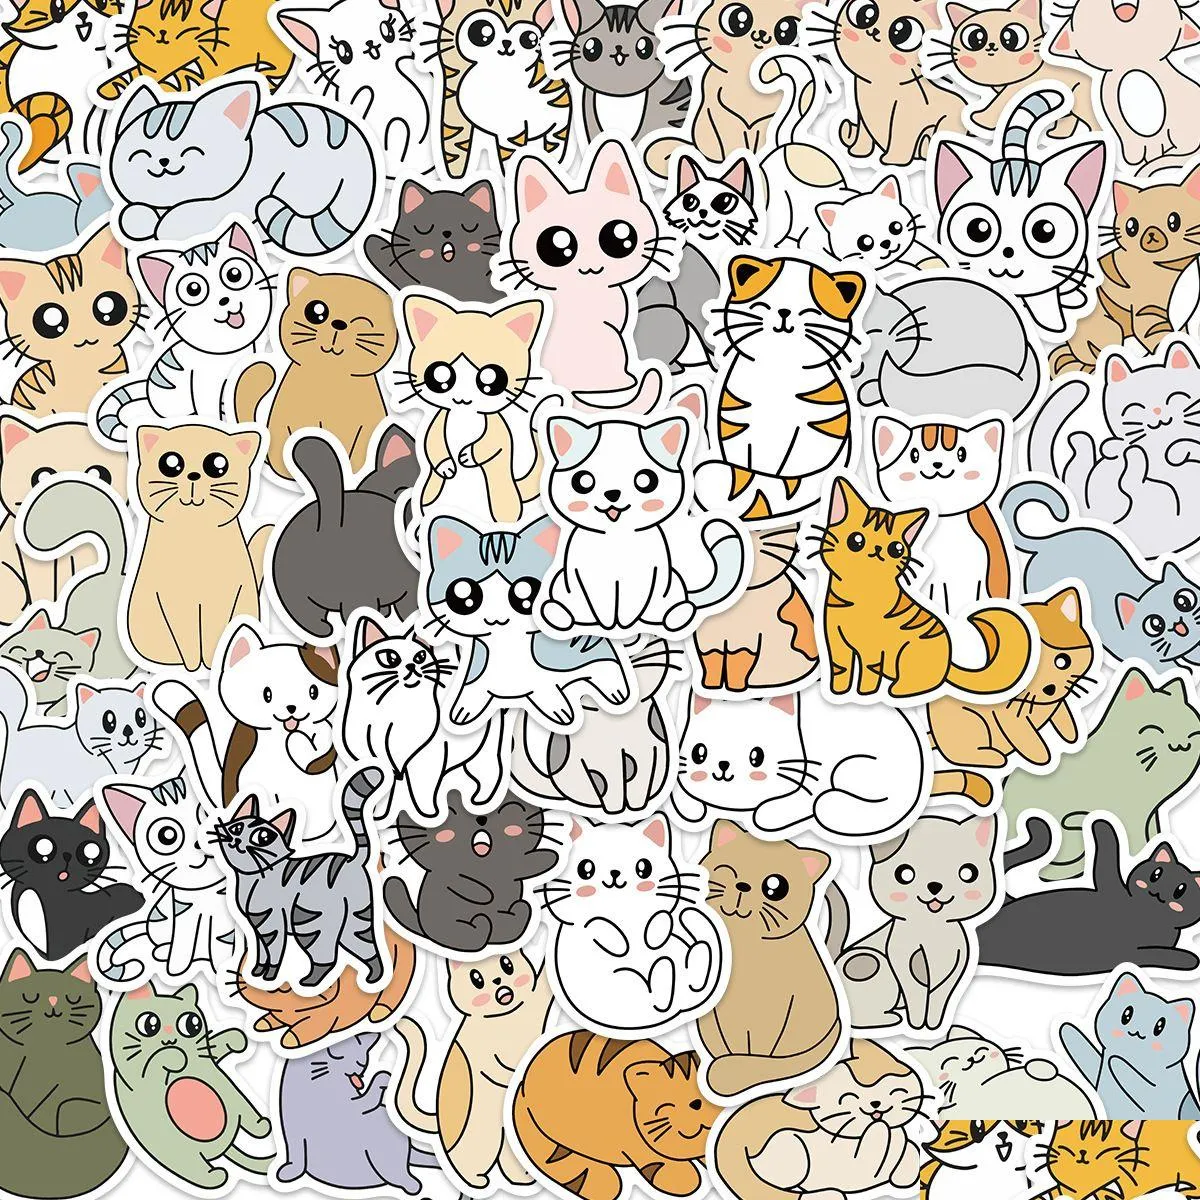 Pack of 60Pcs Wholesale Cartoon Cute Cat Stickers Waterproof Sticker For Luggage Laptop Skateboard Notebook Water Bottle Car decals Kids Gifts